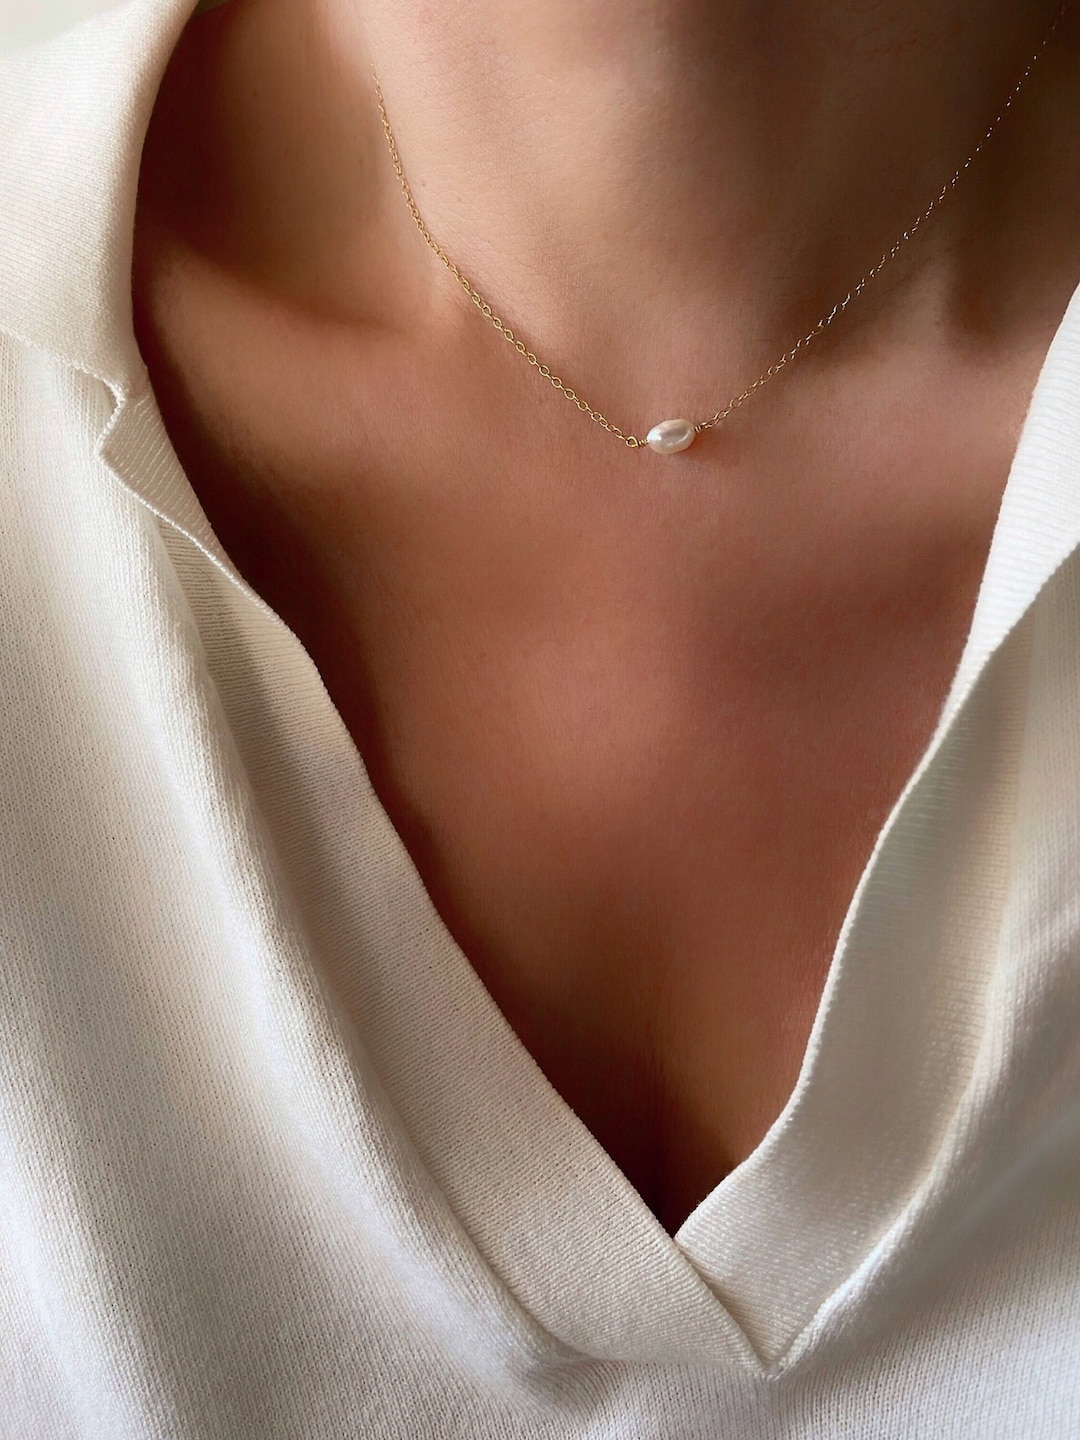 Dainty single pearl necklace Gold Pearl Choker Necklace - Etsy 日本